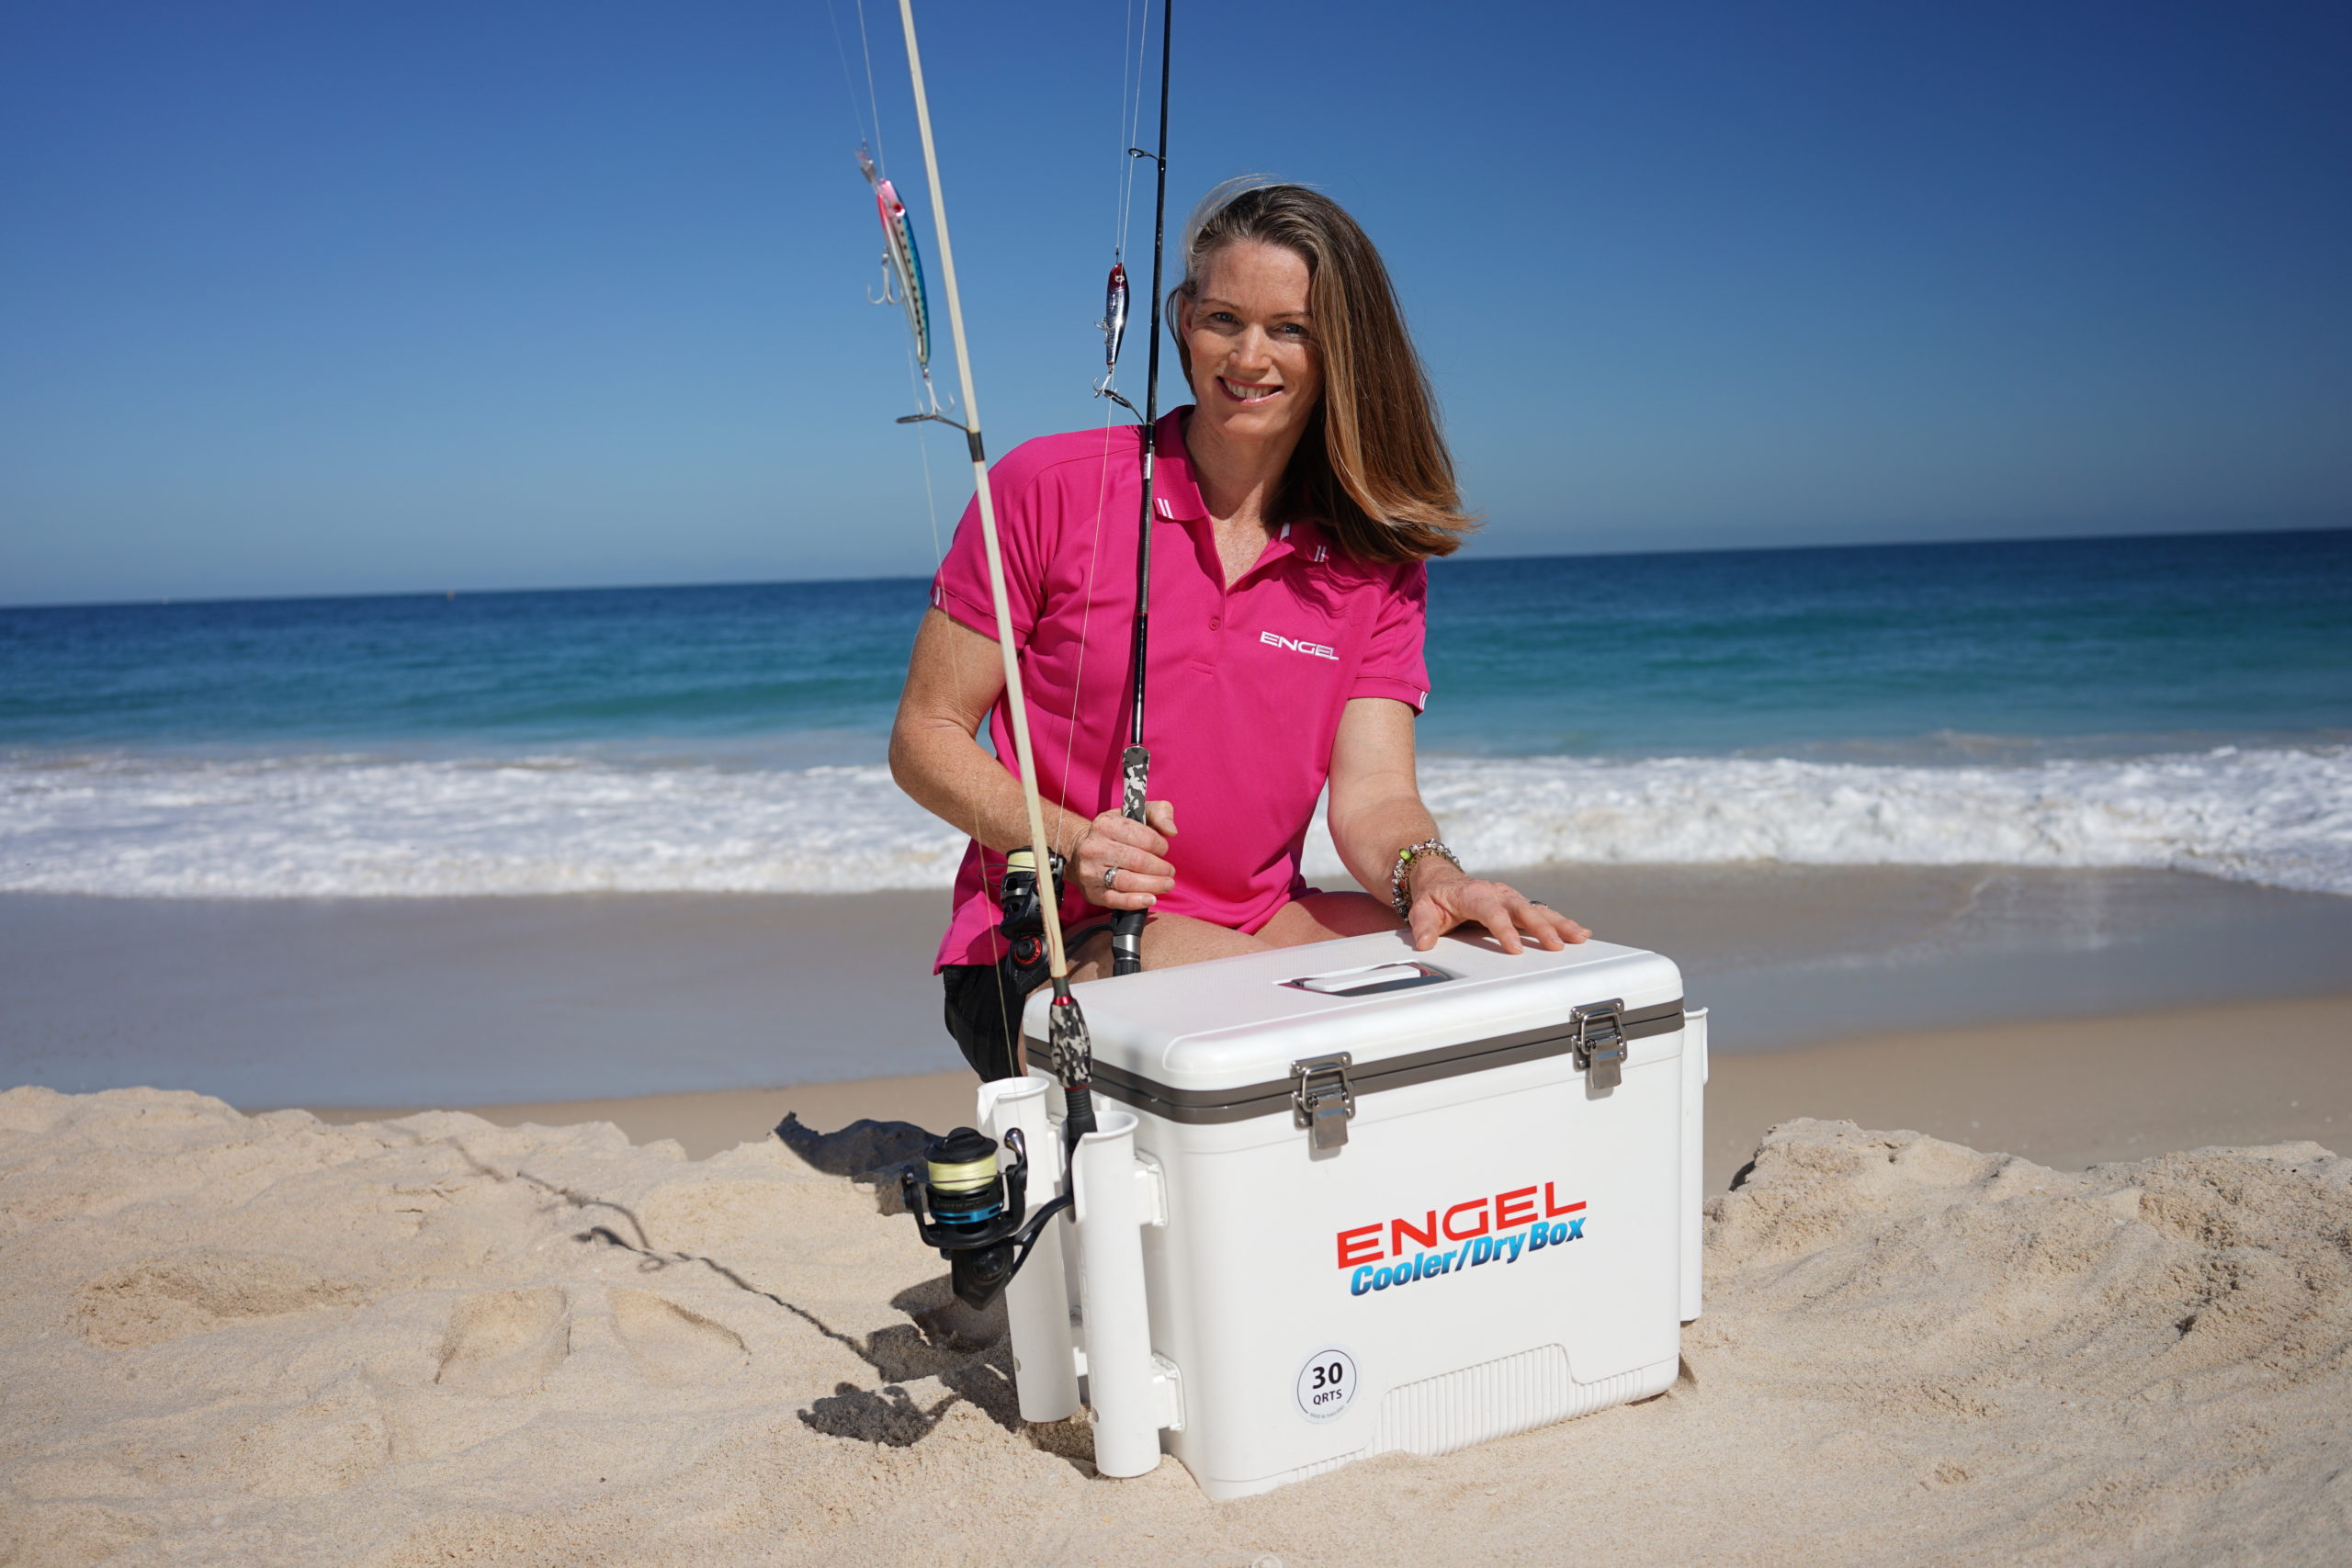 Engel freezer the ultimate accessory for fishos